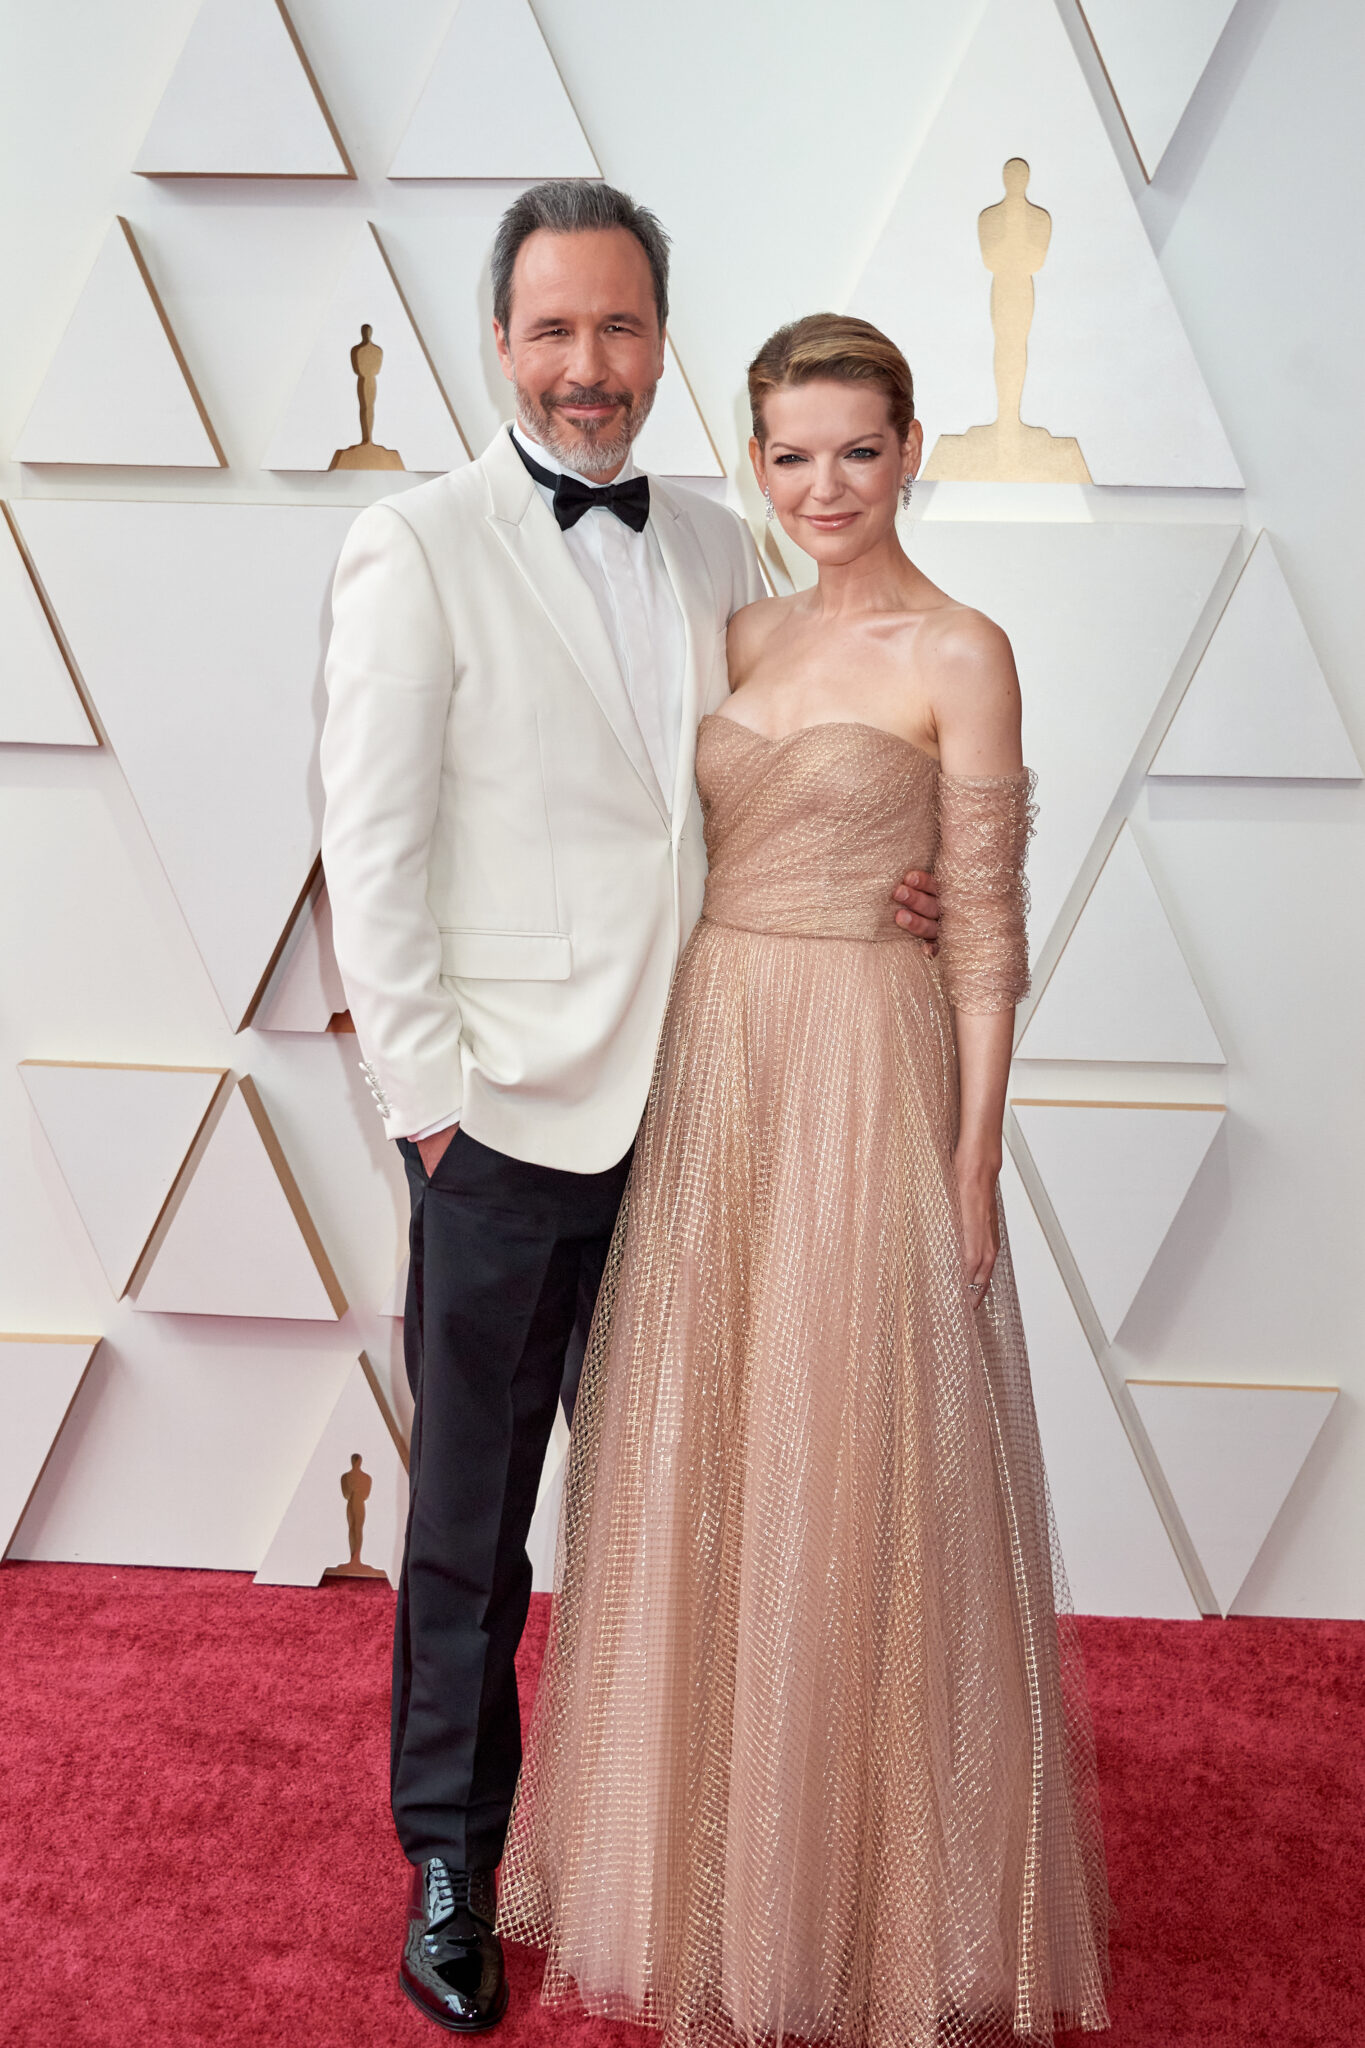 94th Oscars, Academy Awards 4Chion Lifestyle Denis Villeneuve and Tanya Lapointe